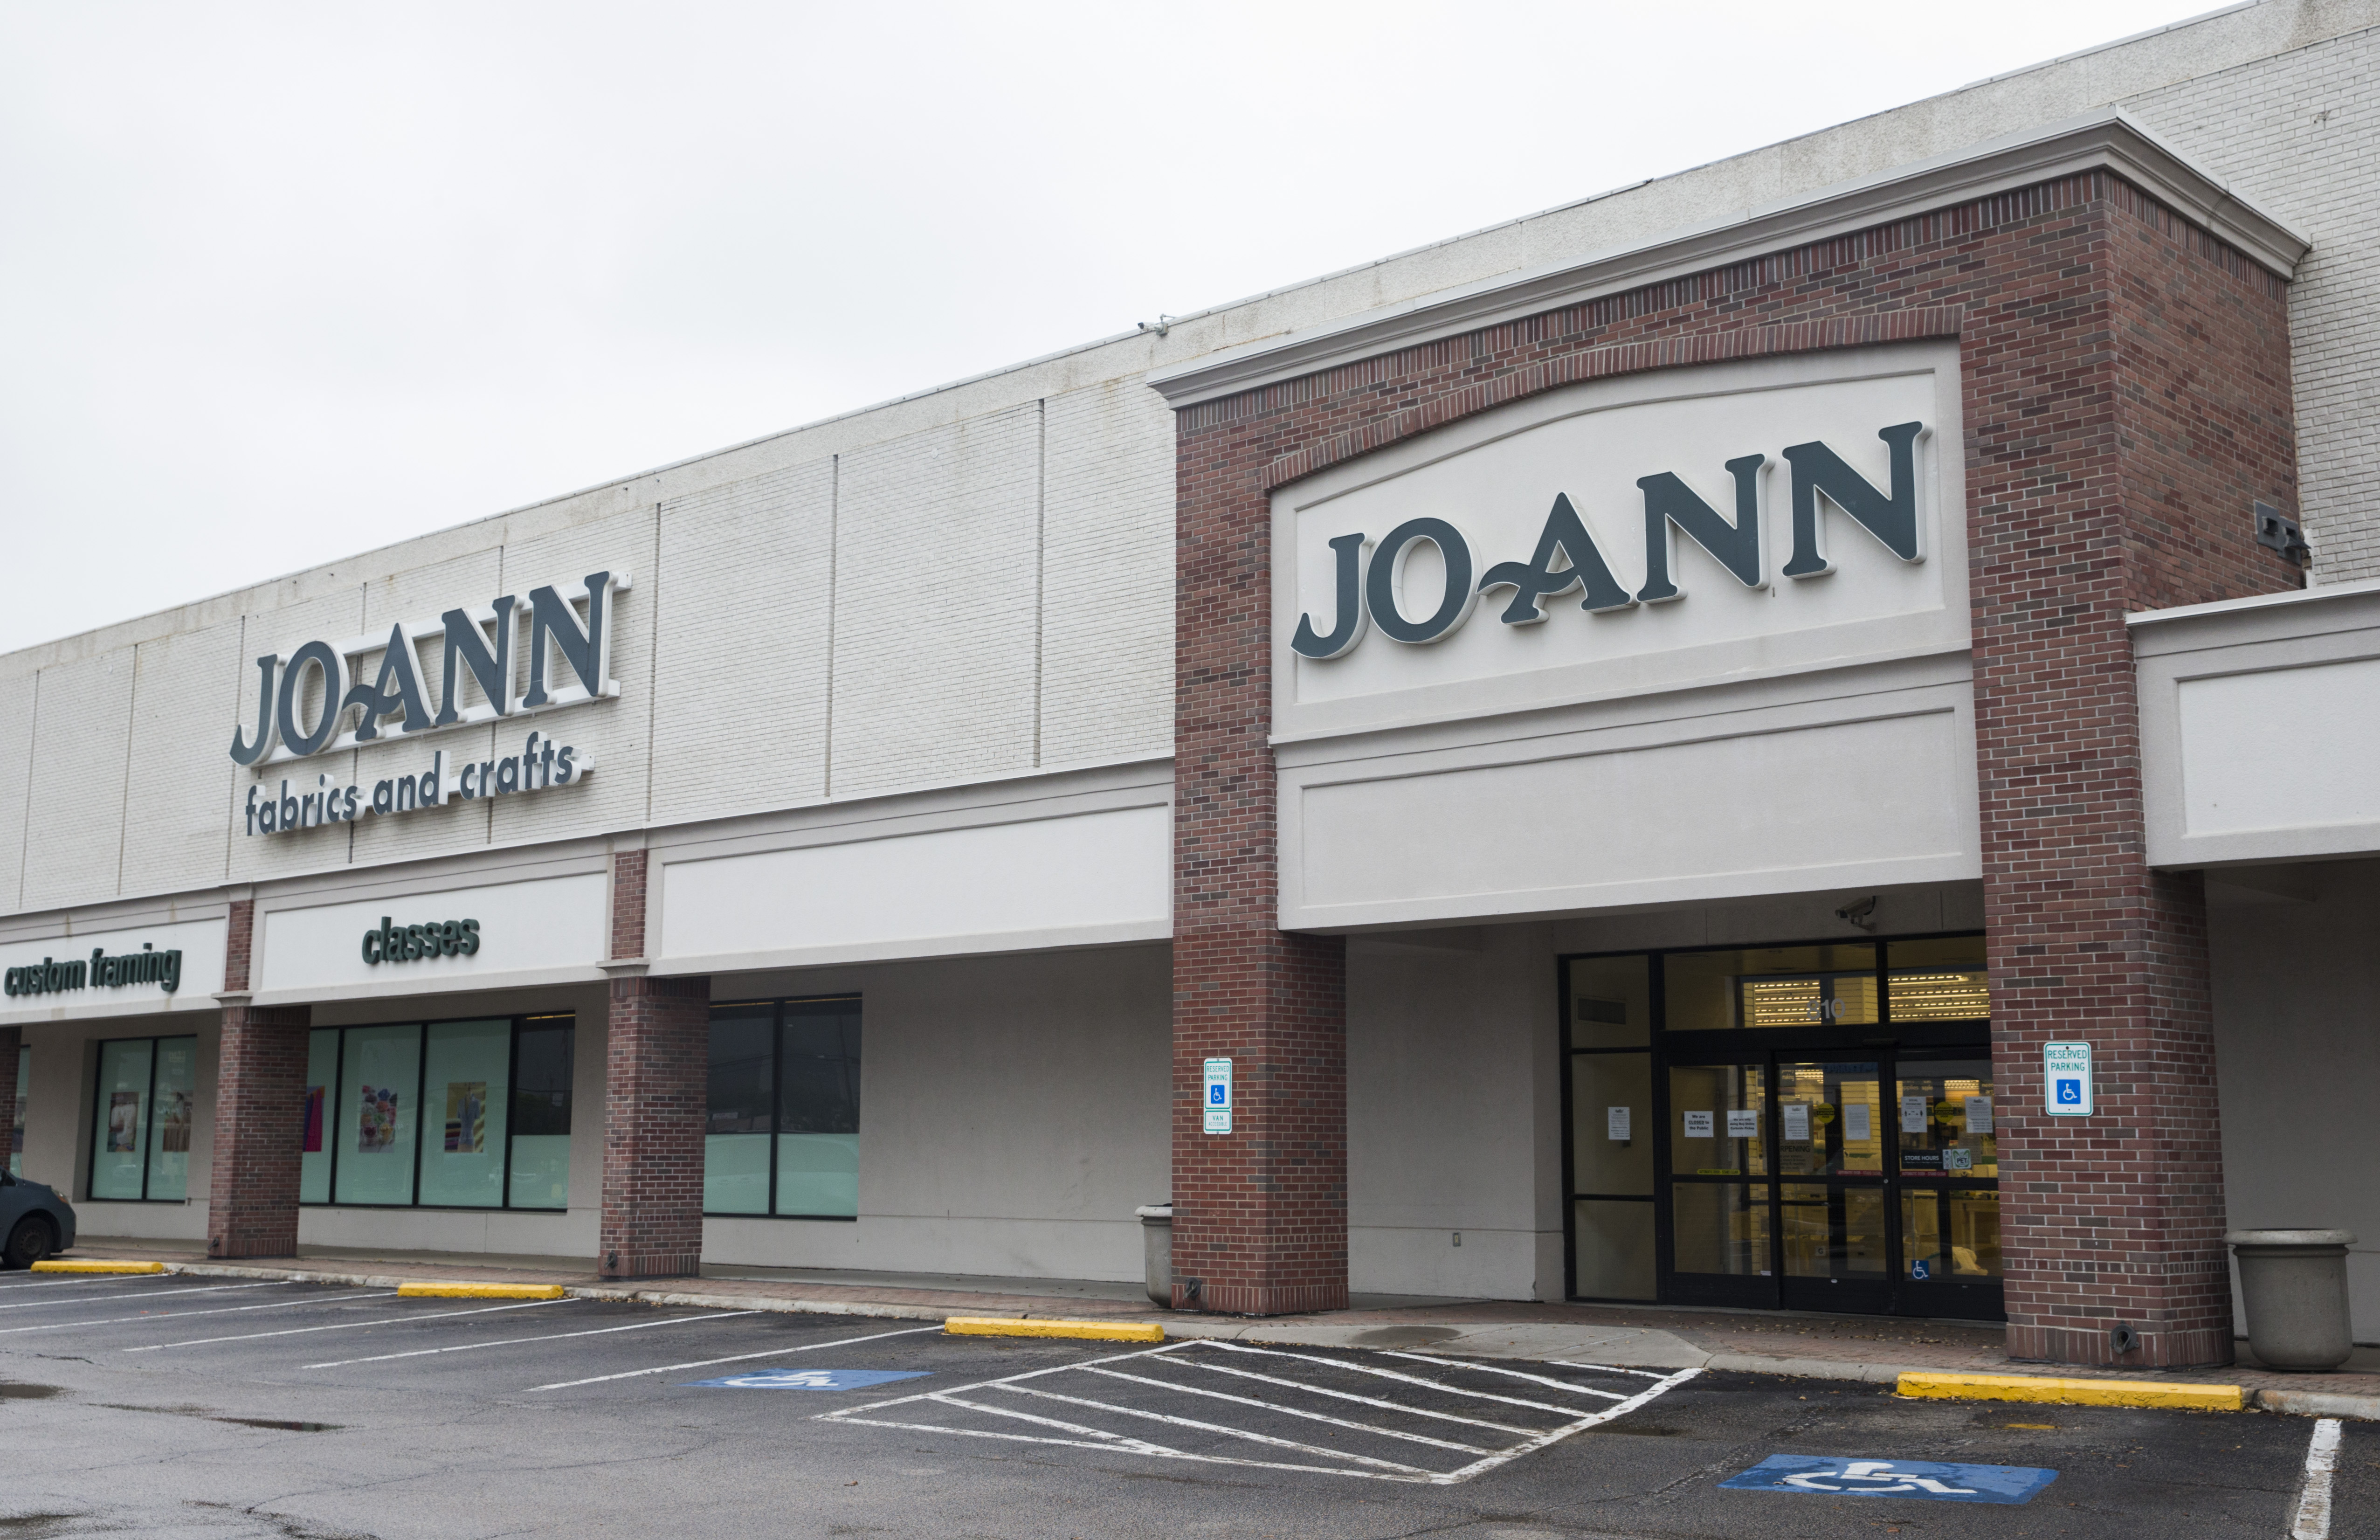 Hobby Lobby, Michaels, or Joann: Which Is the Best Craft Store?